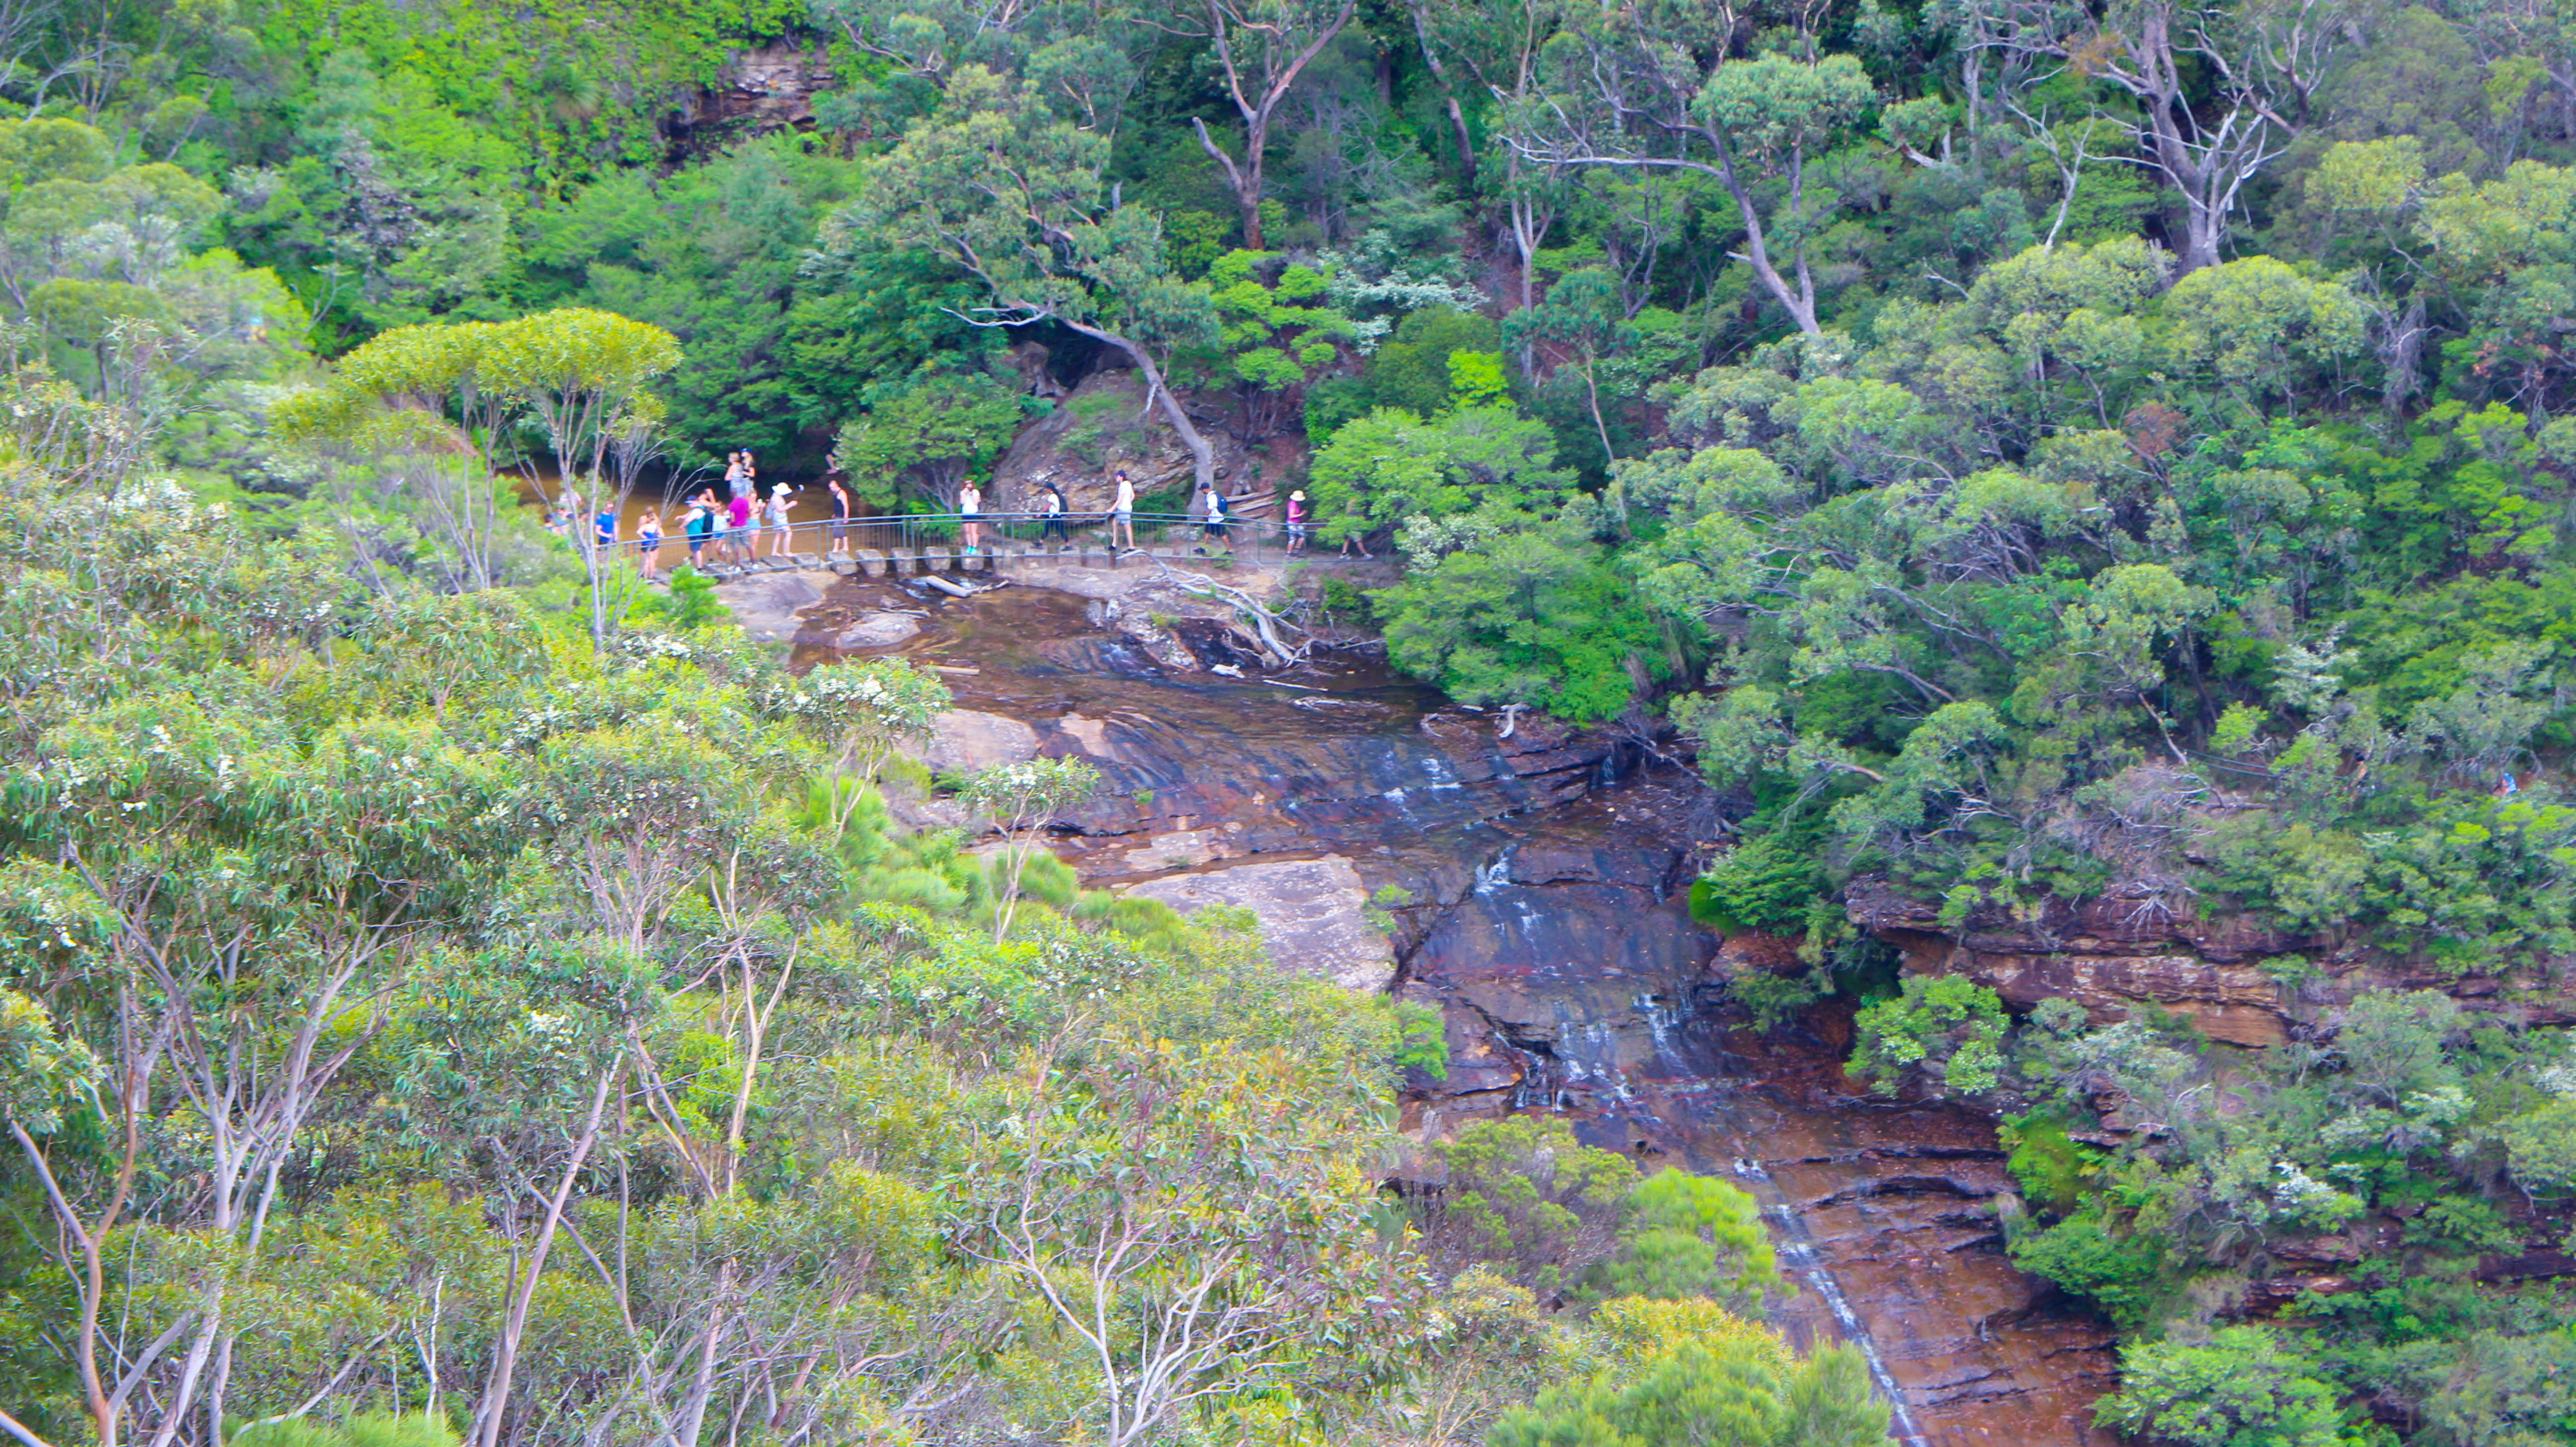 Wentworth Falls from the distance